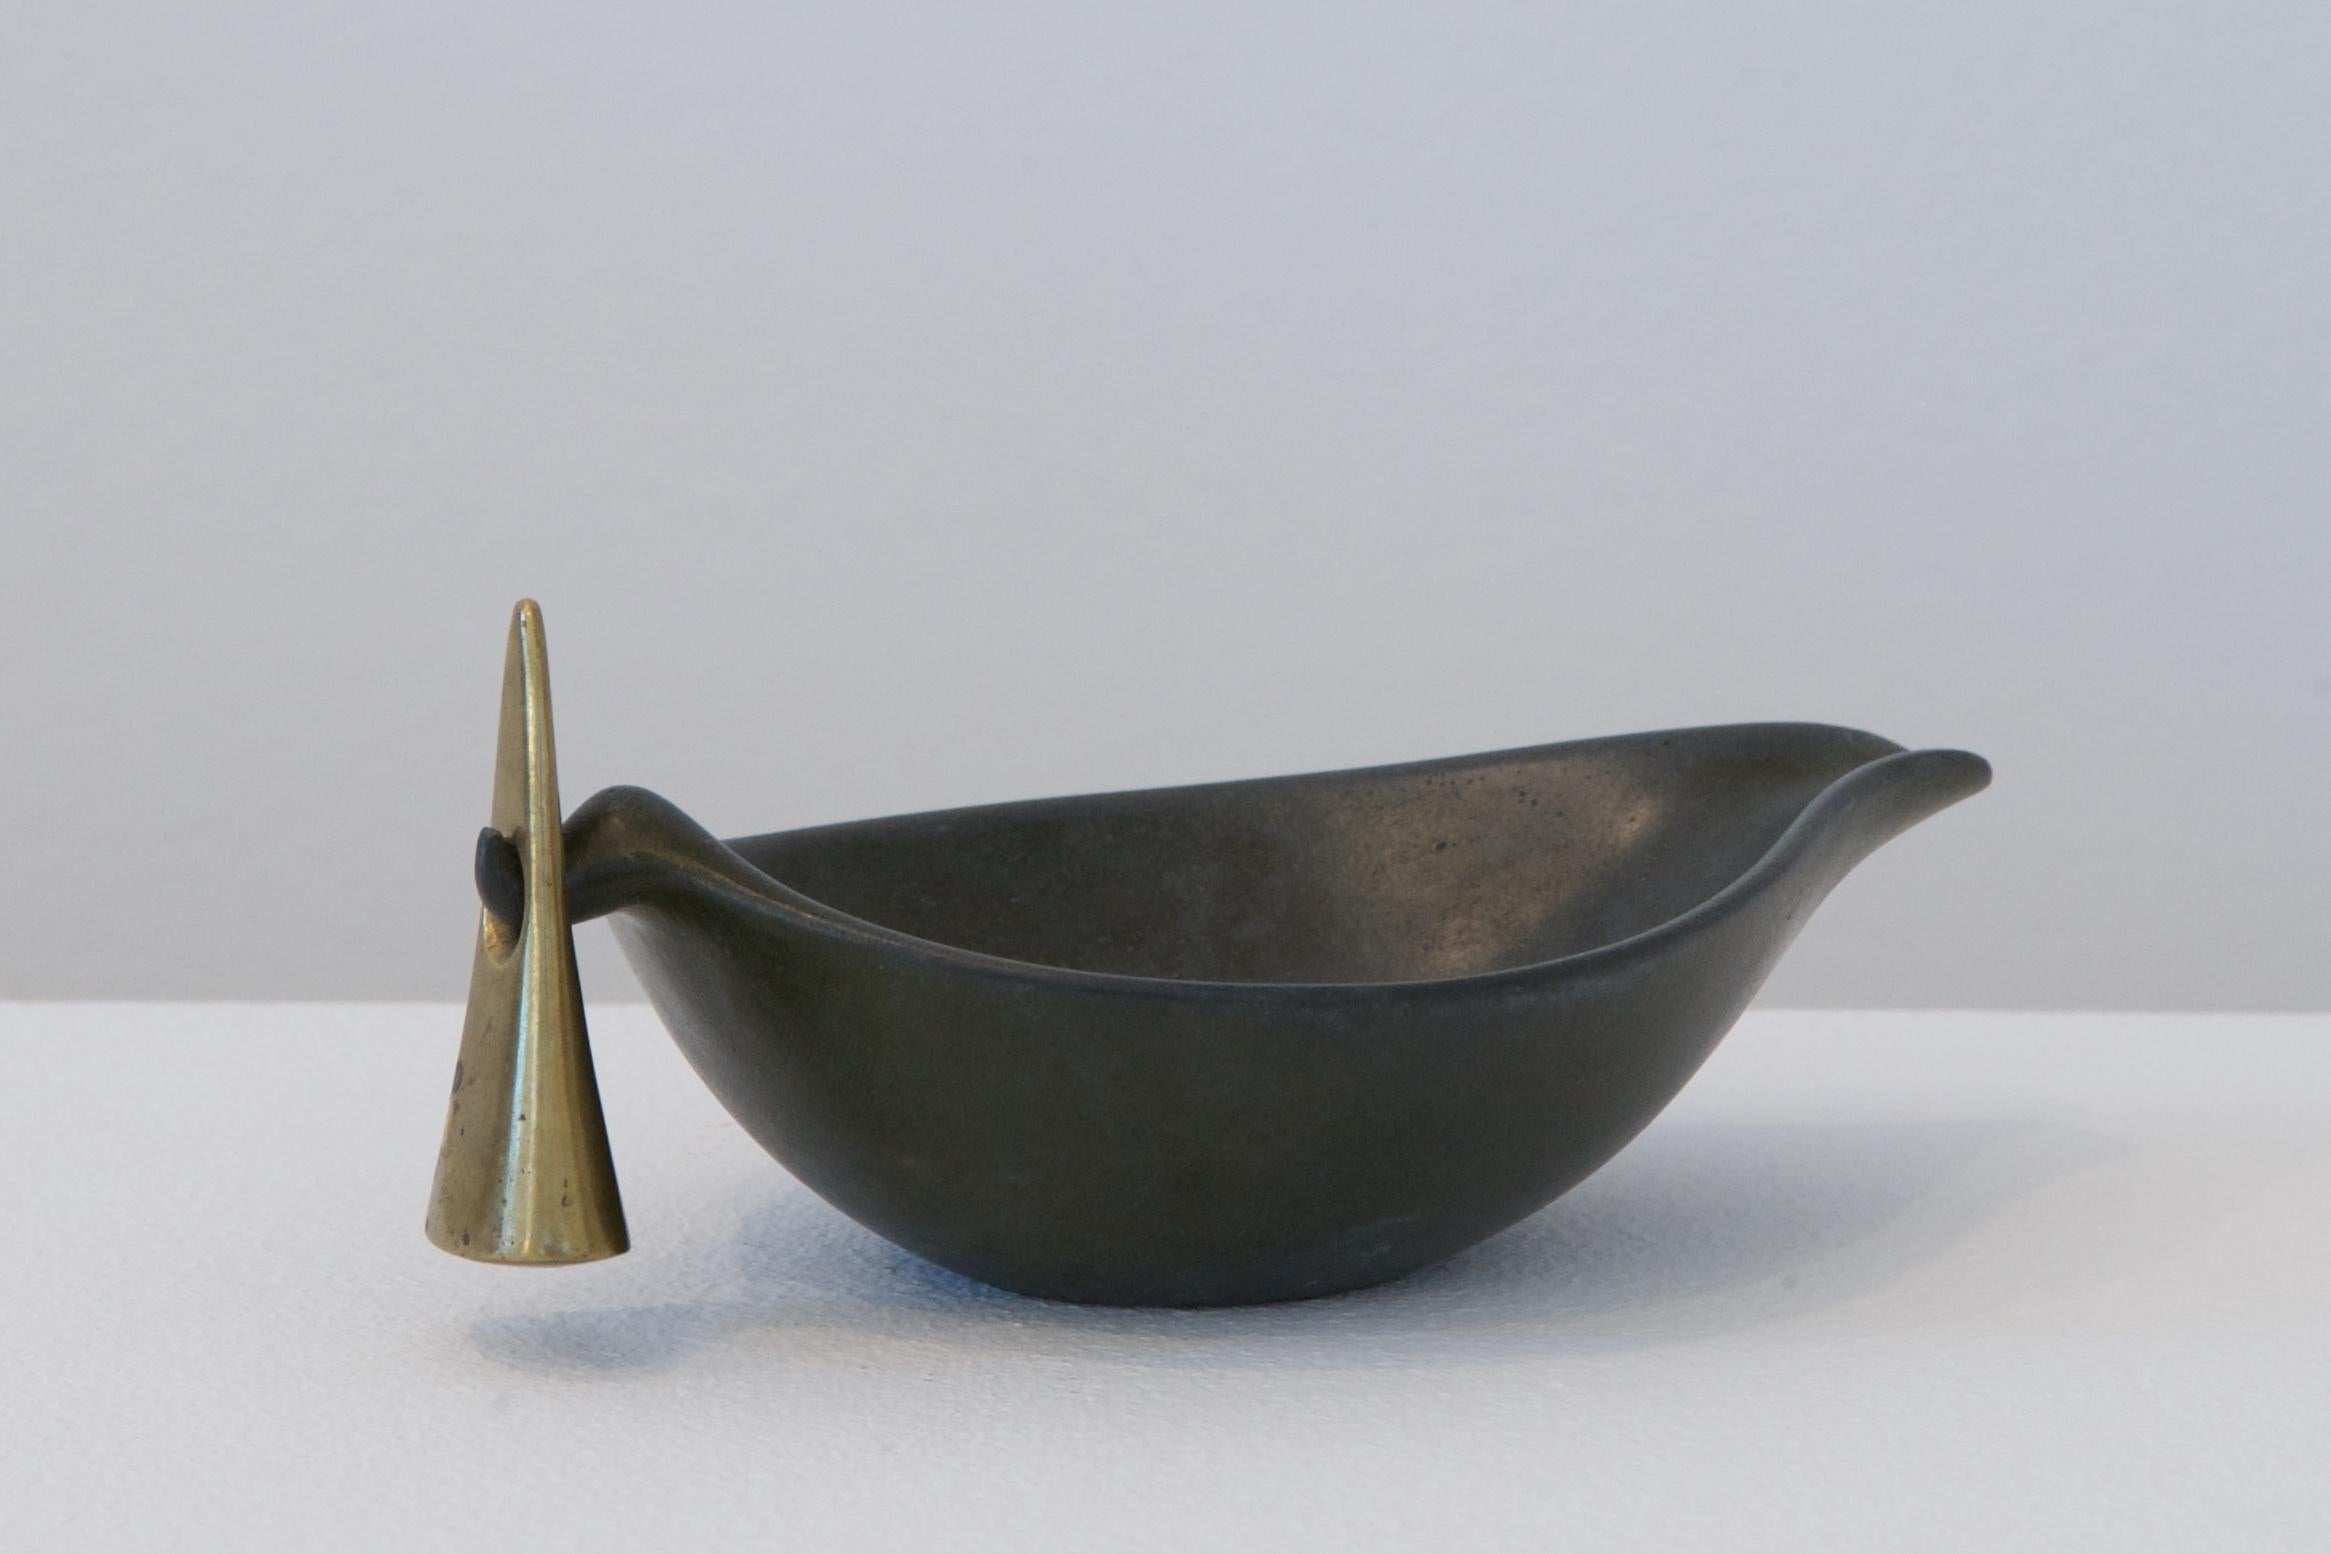 Ashtray with a snuffer, no. 3515
Designed 1947 by Carl Auböck

Ash tray: cast, gray metall, (patinated); Snuffer: cast brass
16.2 x 10.2 cm, h 6.8 cm / 6.3 x 3.93 in, h 2.44 in

Original, vintage piece!
Good condition with traces of aging and